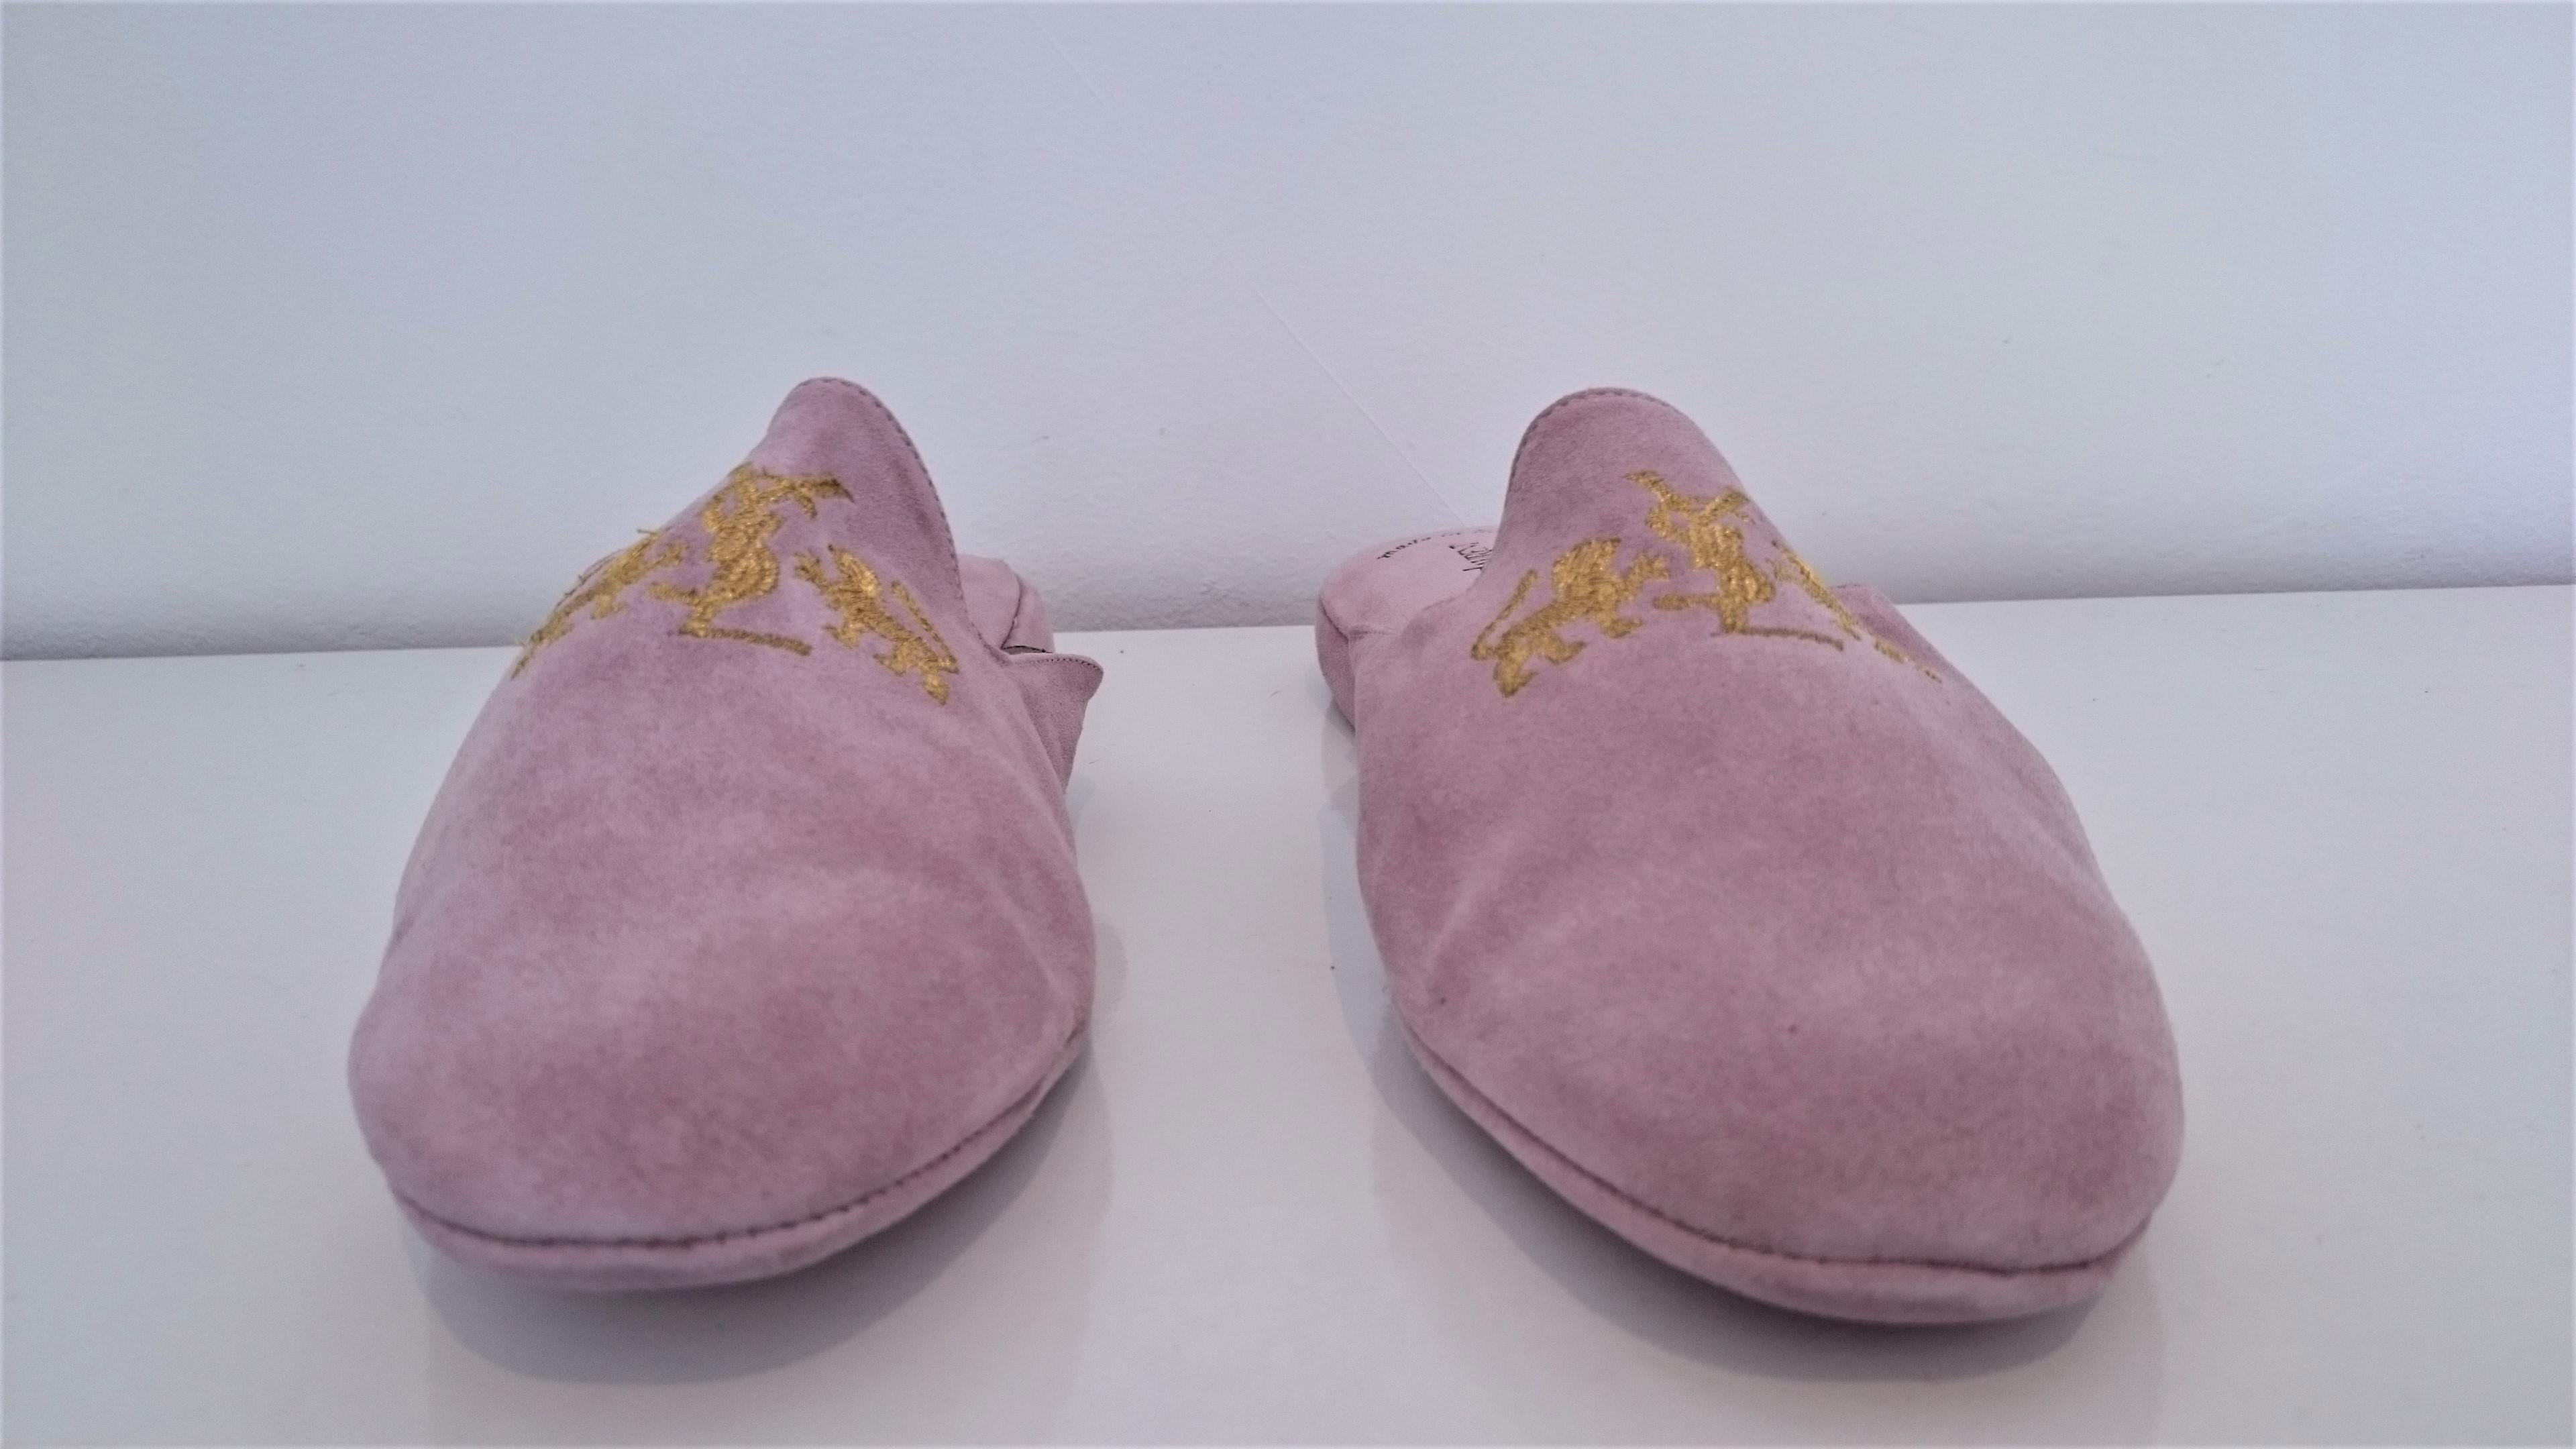 Yves Saint Laurent Pink Suede Slippers for Home. 
YVS Logo engraved on the top of each shoe.
NEW, never worn.
Original Yves Saint Laurent Pink Suede Bag included.
Size 10 1/2 
Made in Italy